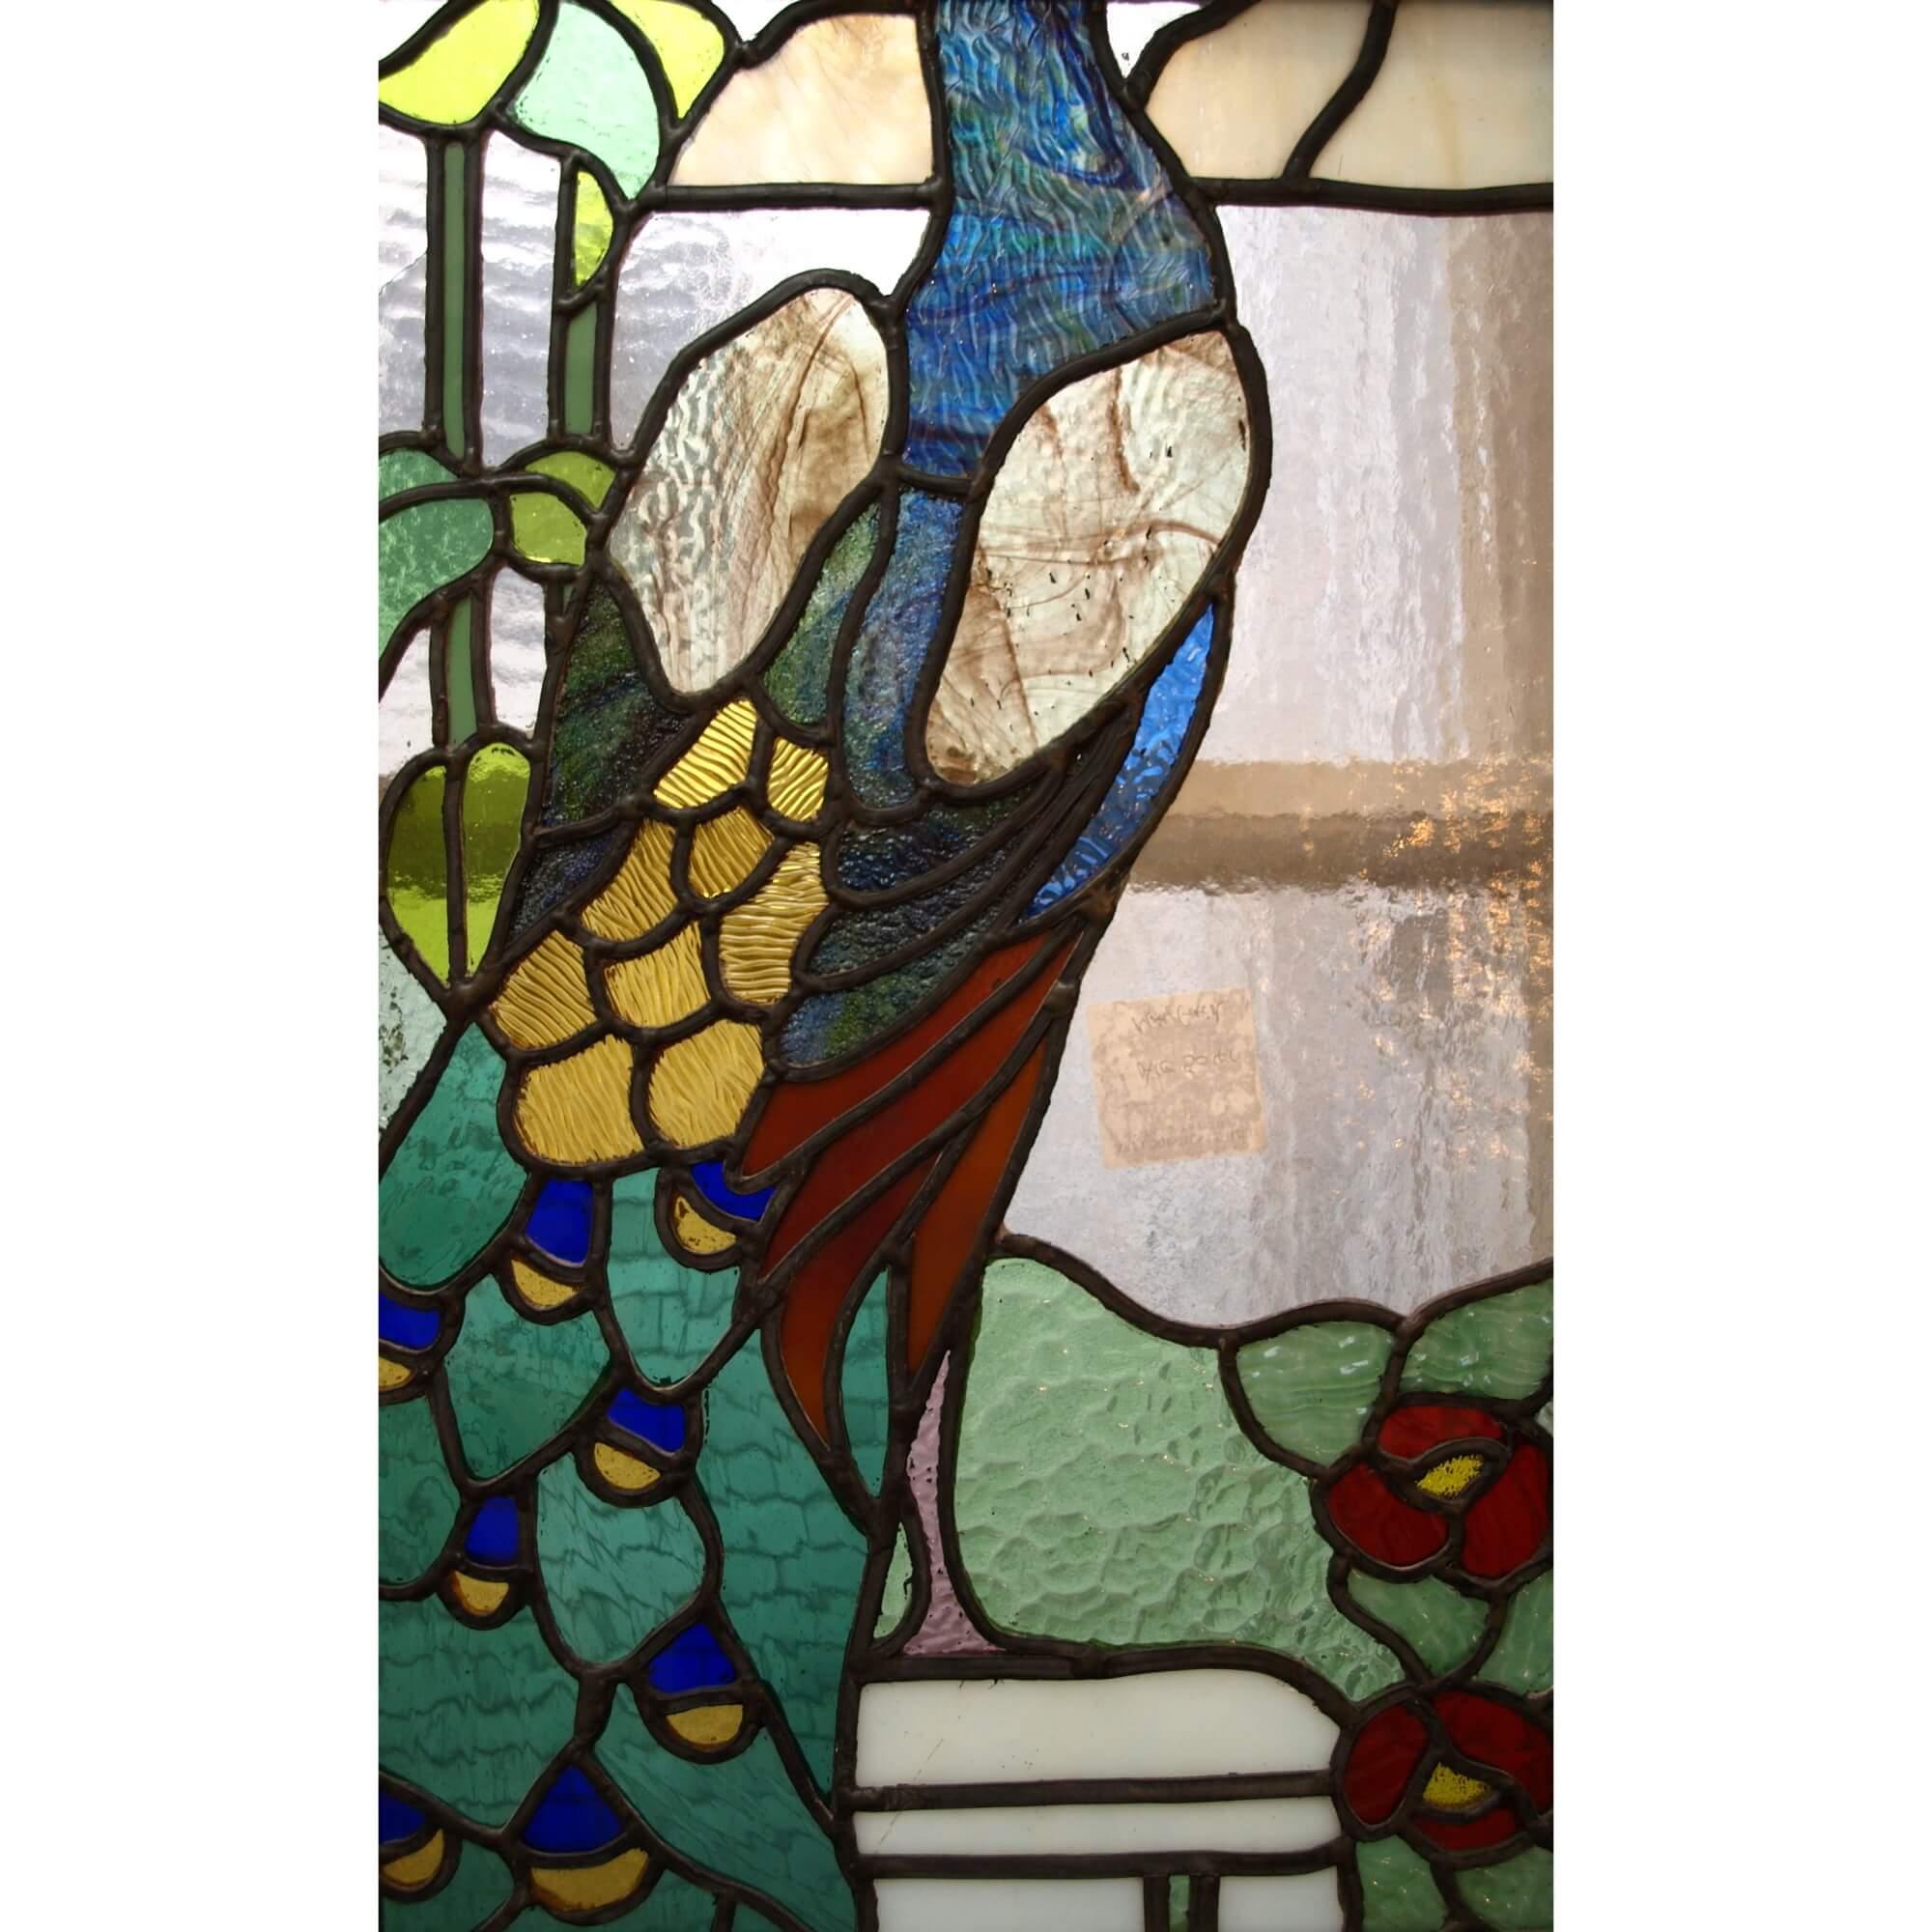 stained glass doors for sale